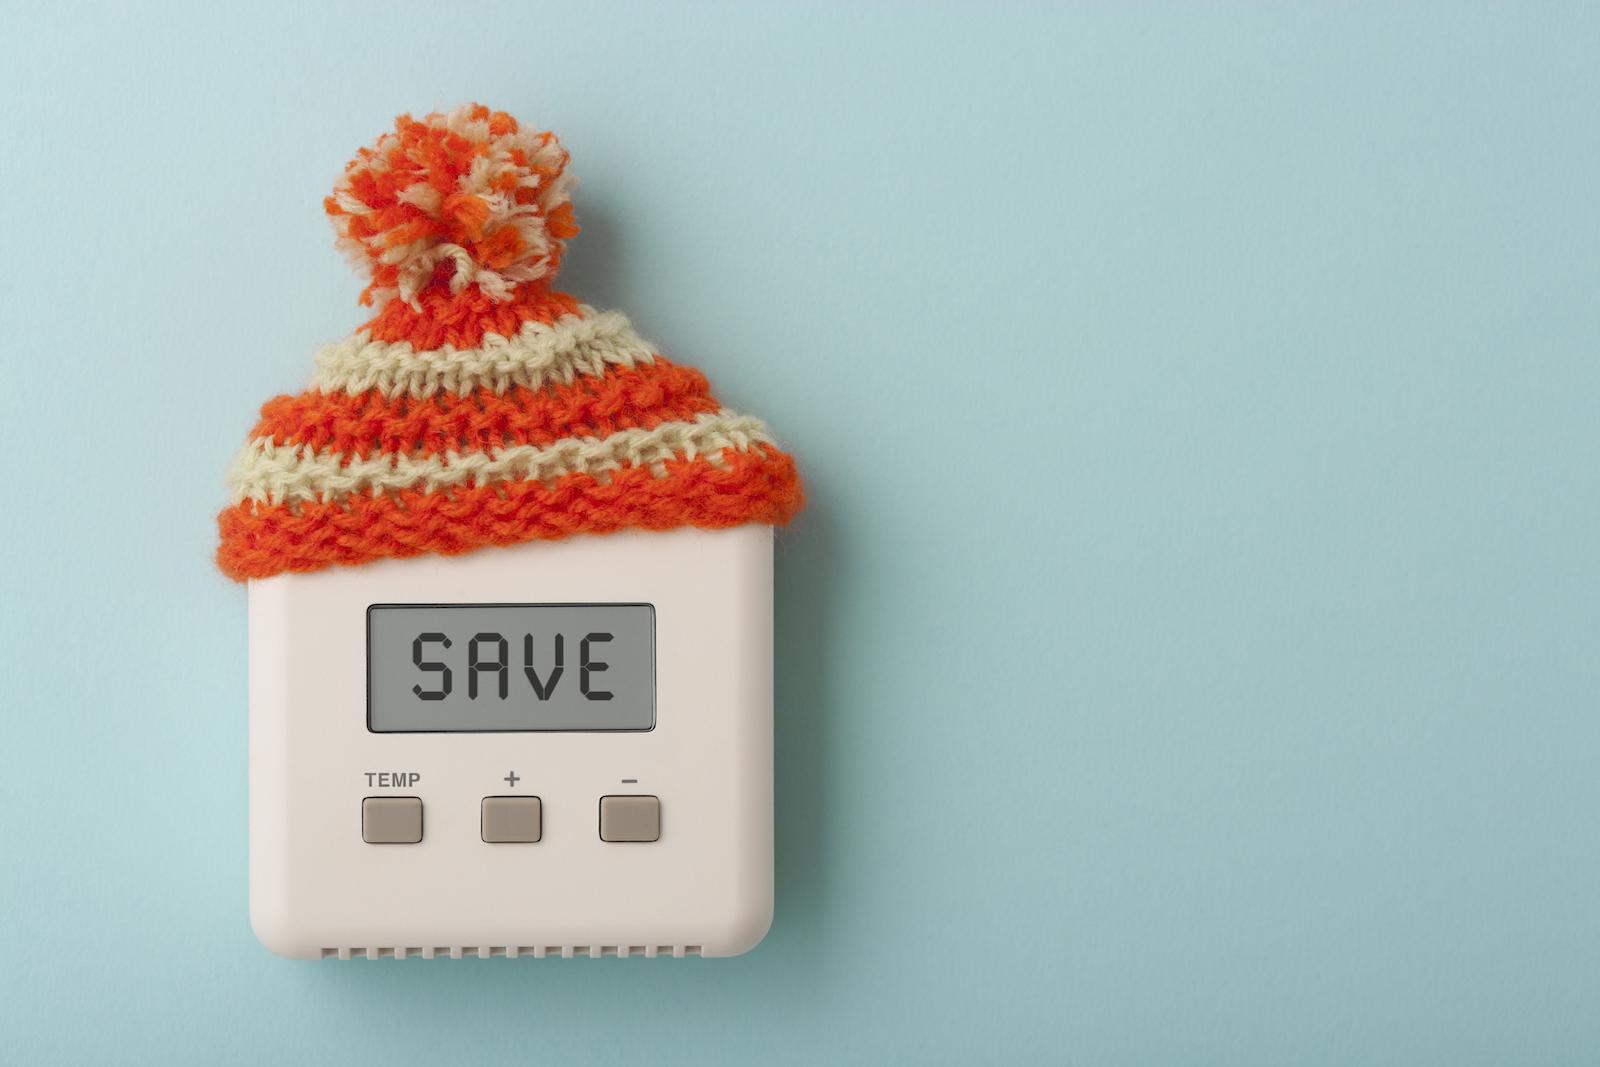 A thermostat wearing an orange and yellow striped knit hat.